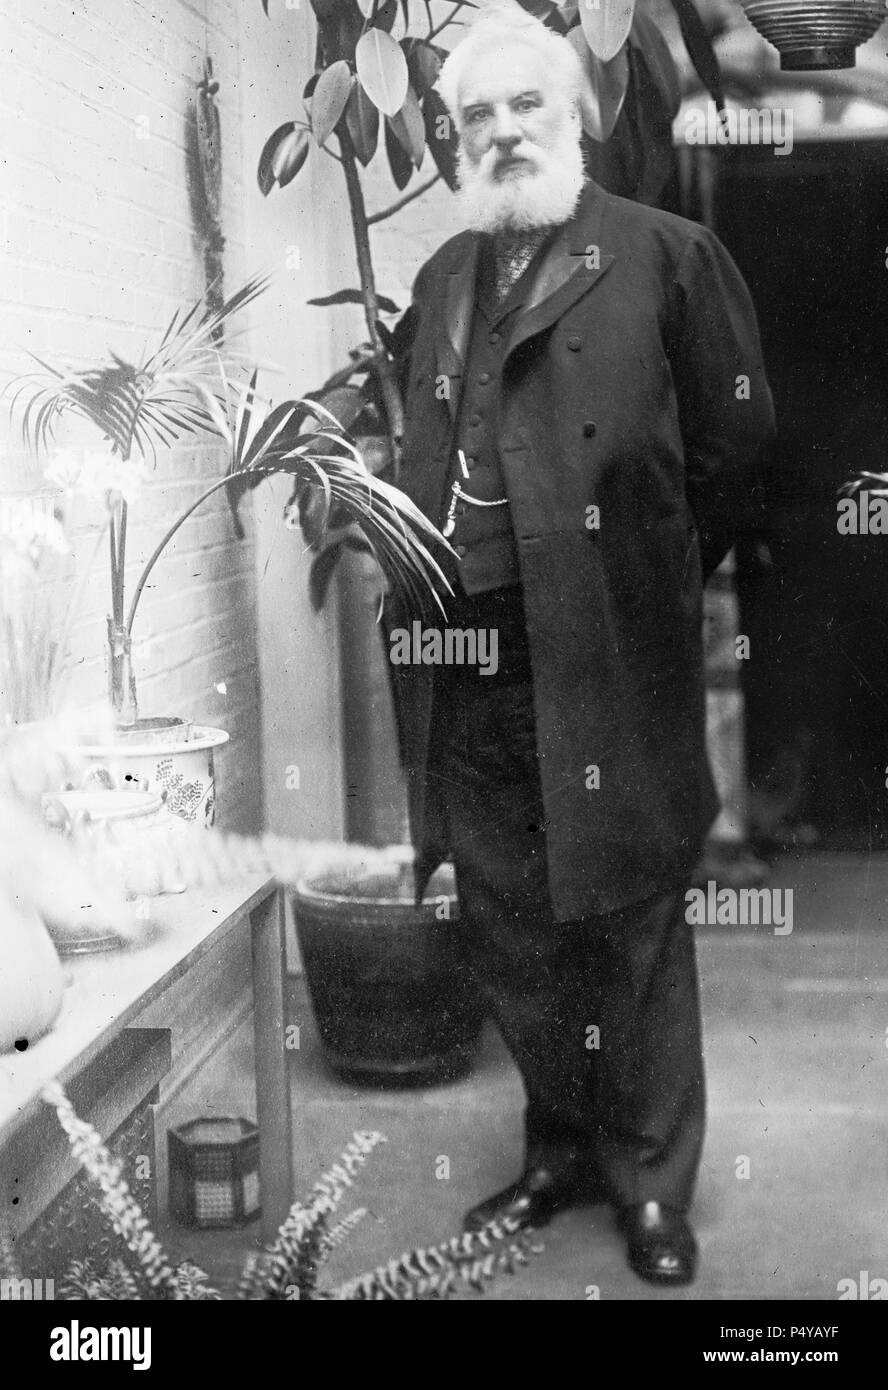 A.G. Bell, standing, among plants Stock Photo